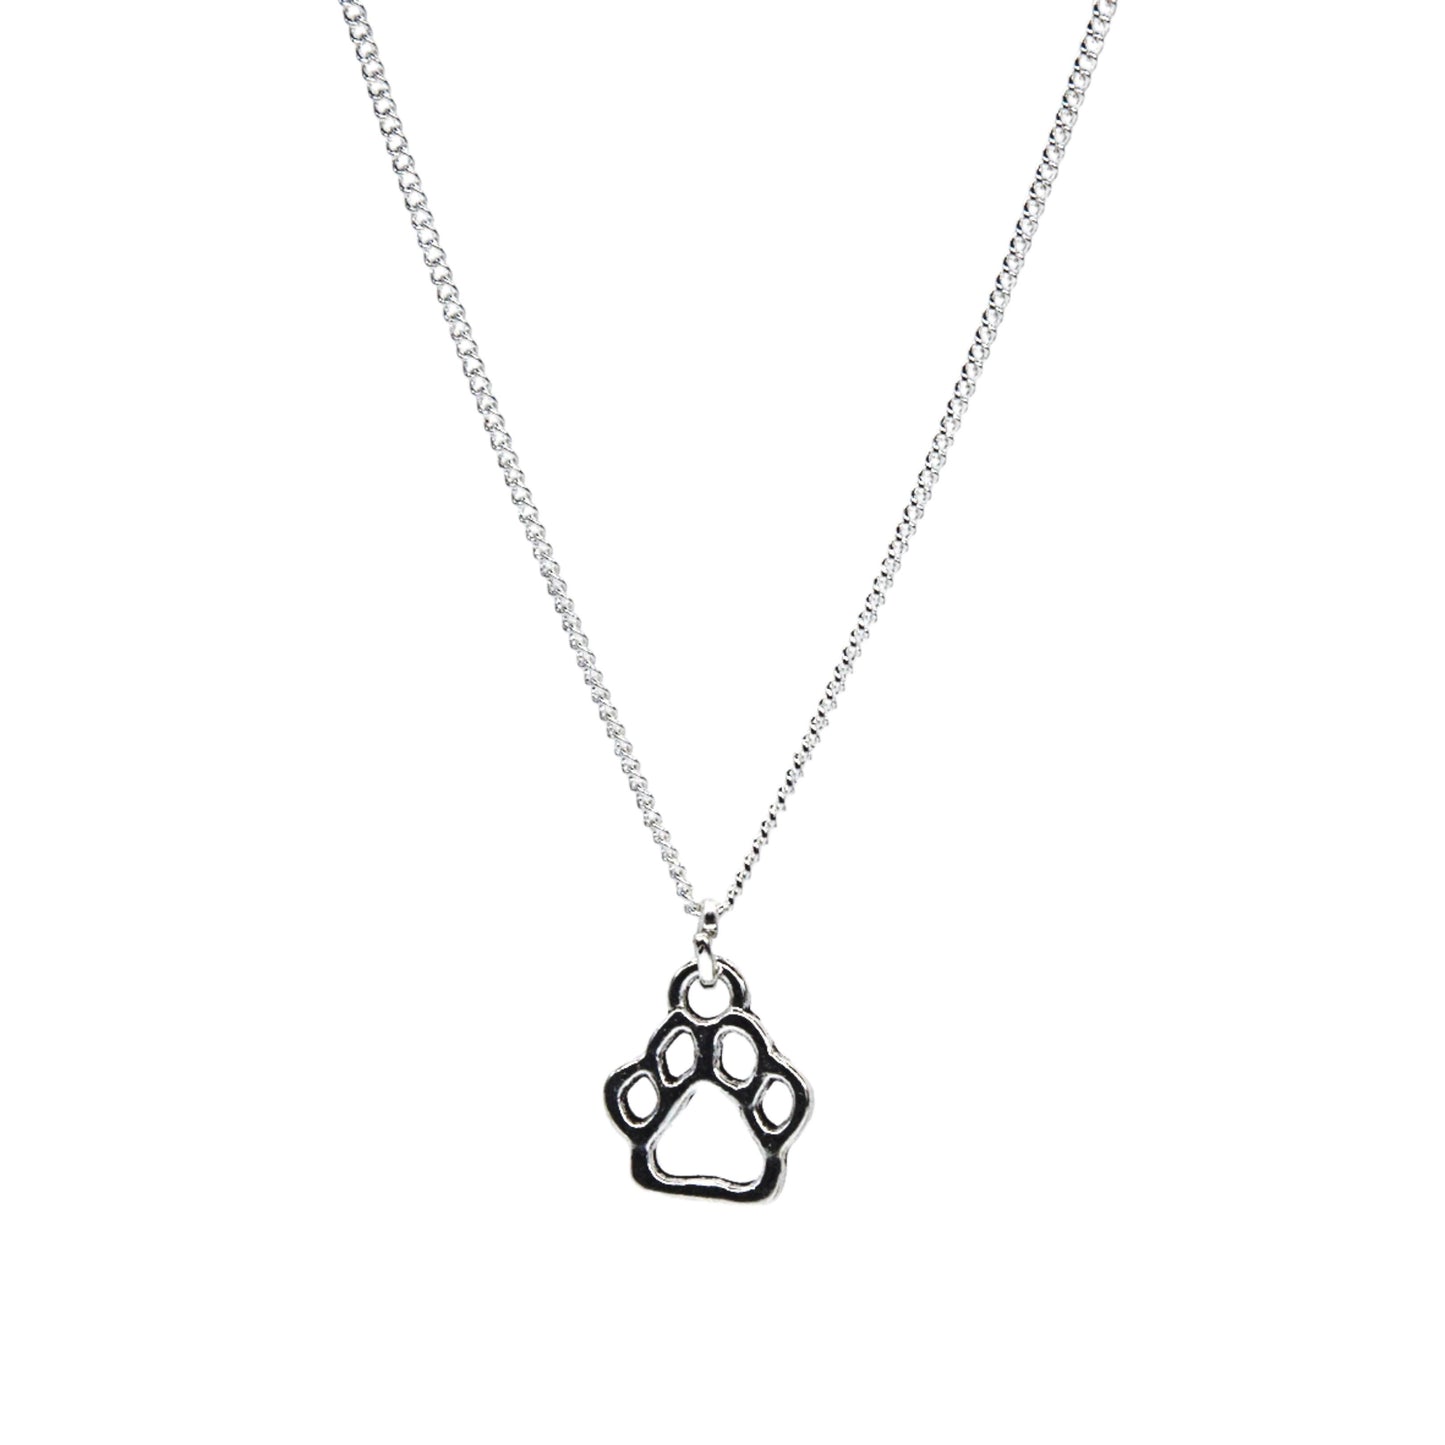 Silver Animal Paw Necklace - Adjustble length